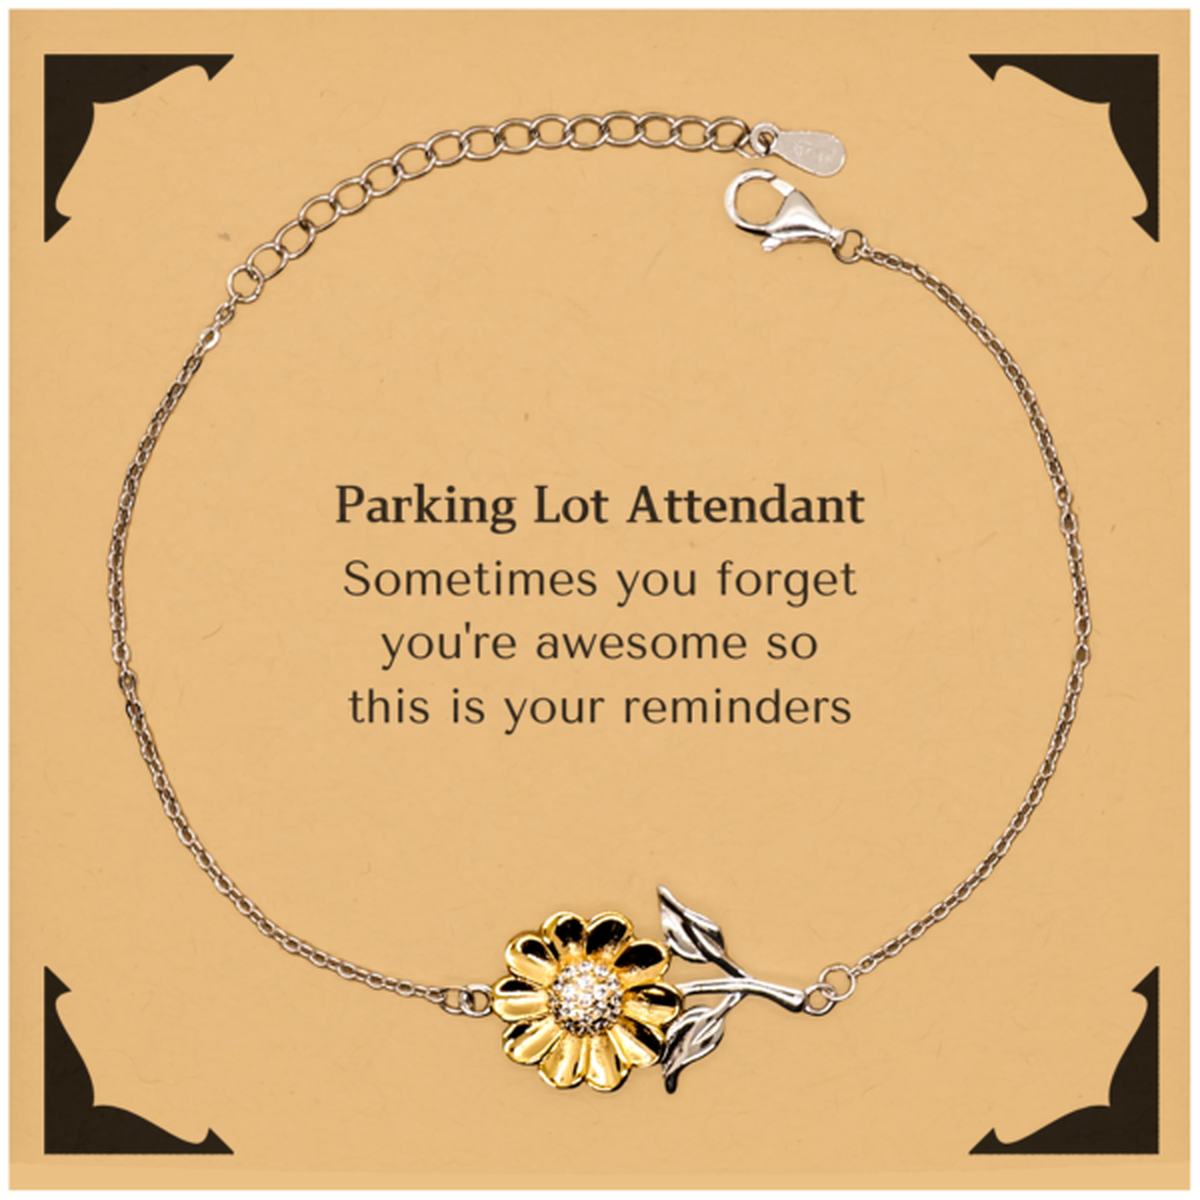 Sentimental Parking Lot Attendant Sunflower Bracelet, Parking Lot Attendant Sometimes you forget you're awesome so this is your reminders, Graduation Christmas Birthday Gifts for Parking Lot Attendant, Men, Women, Coworkers